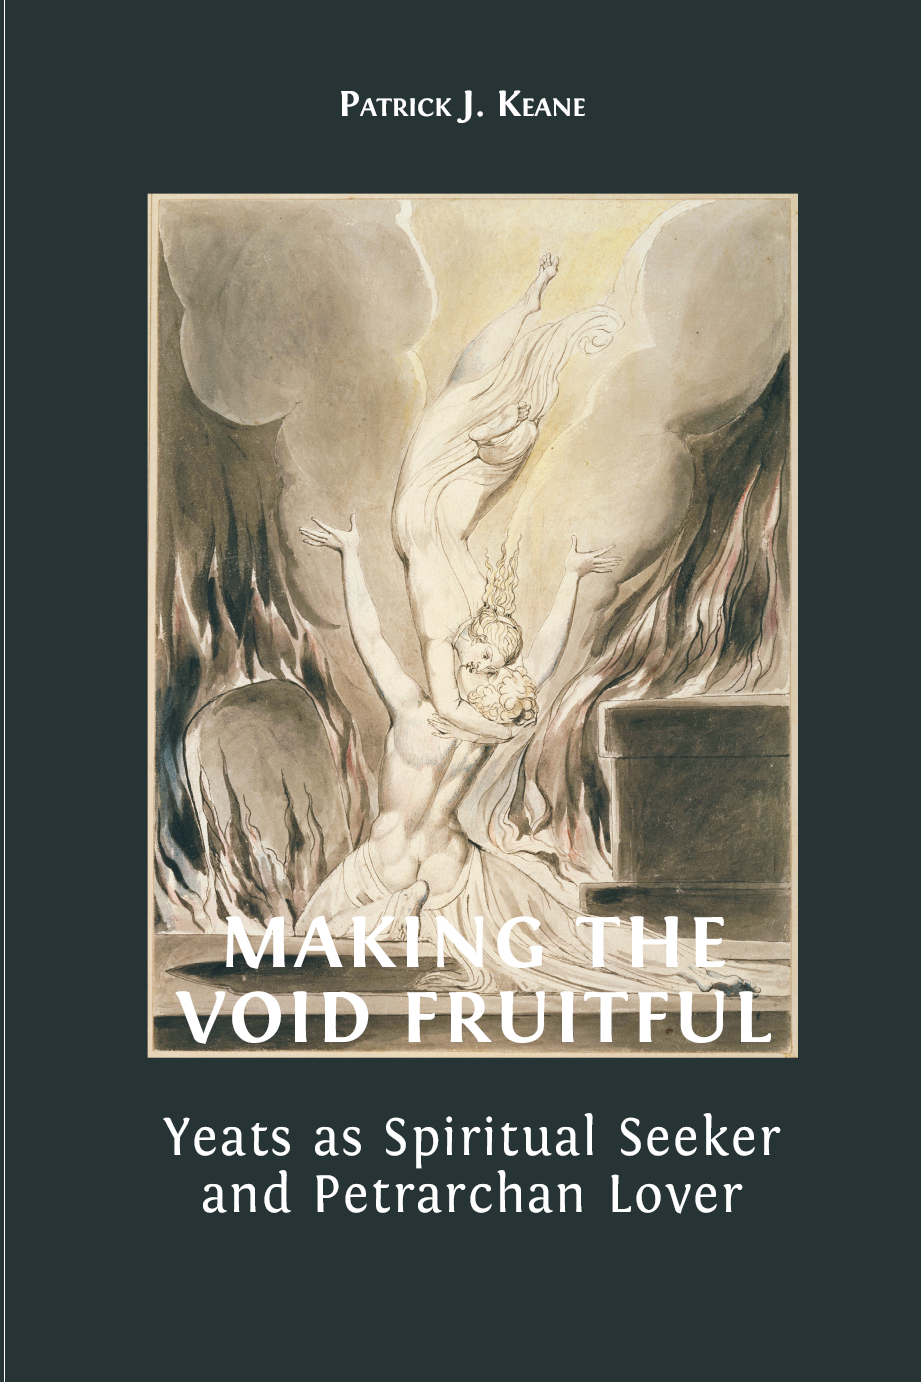 Making the Void Fruitful book cover image